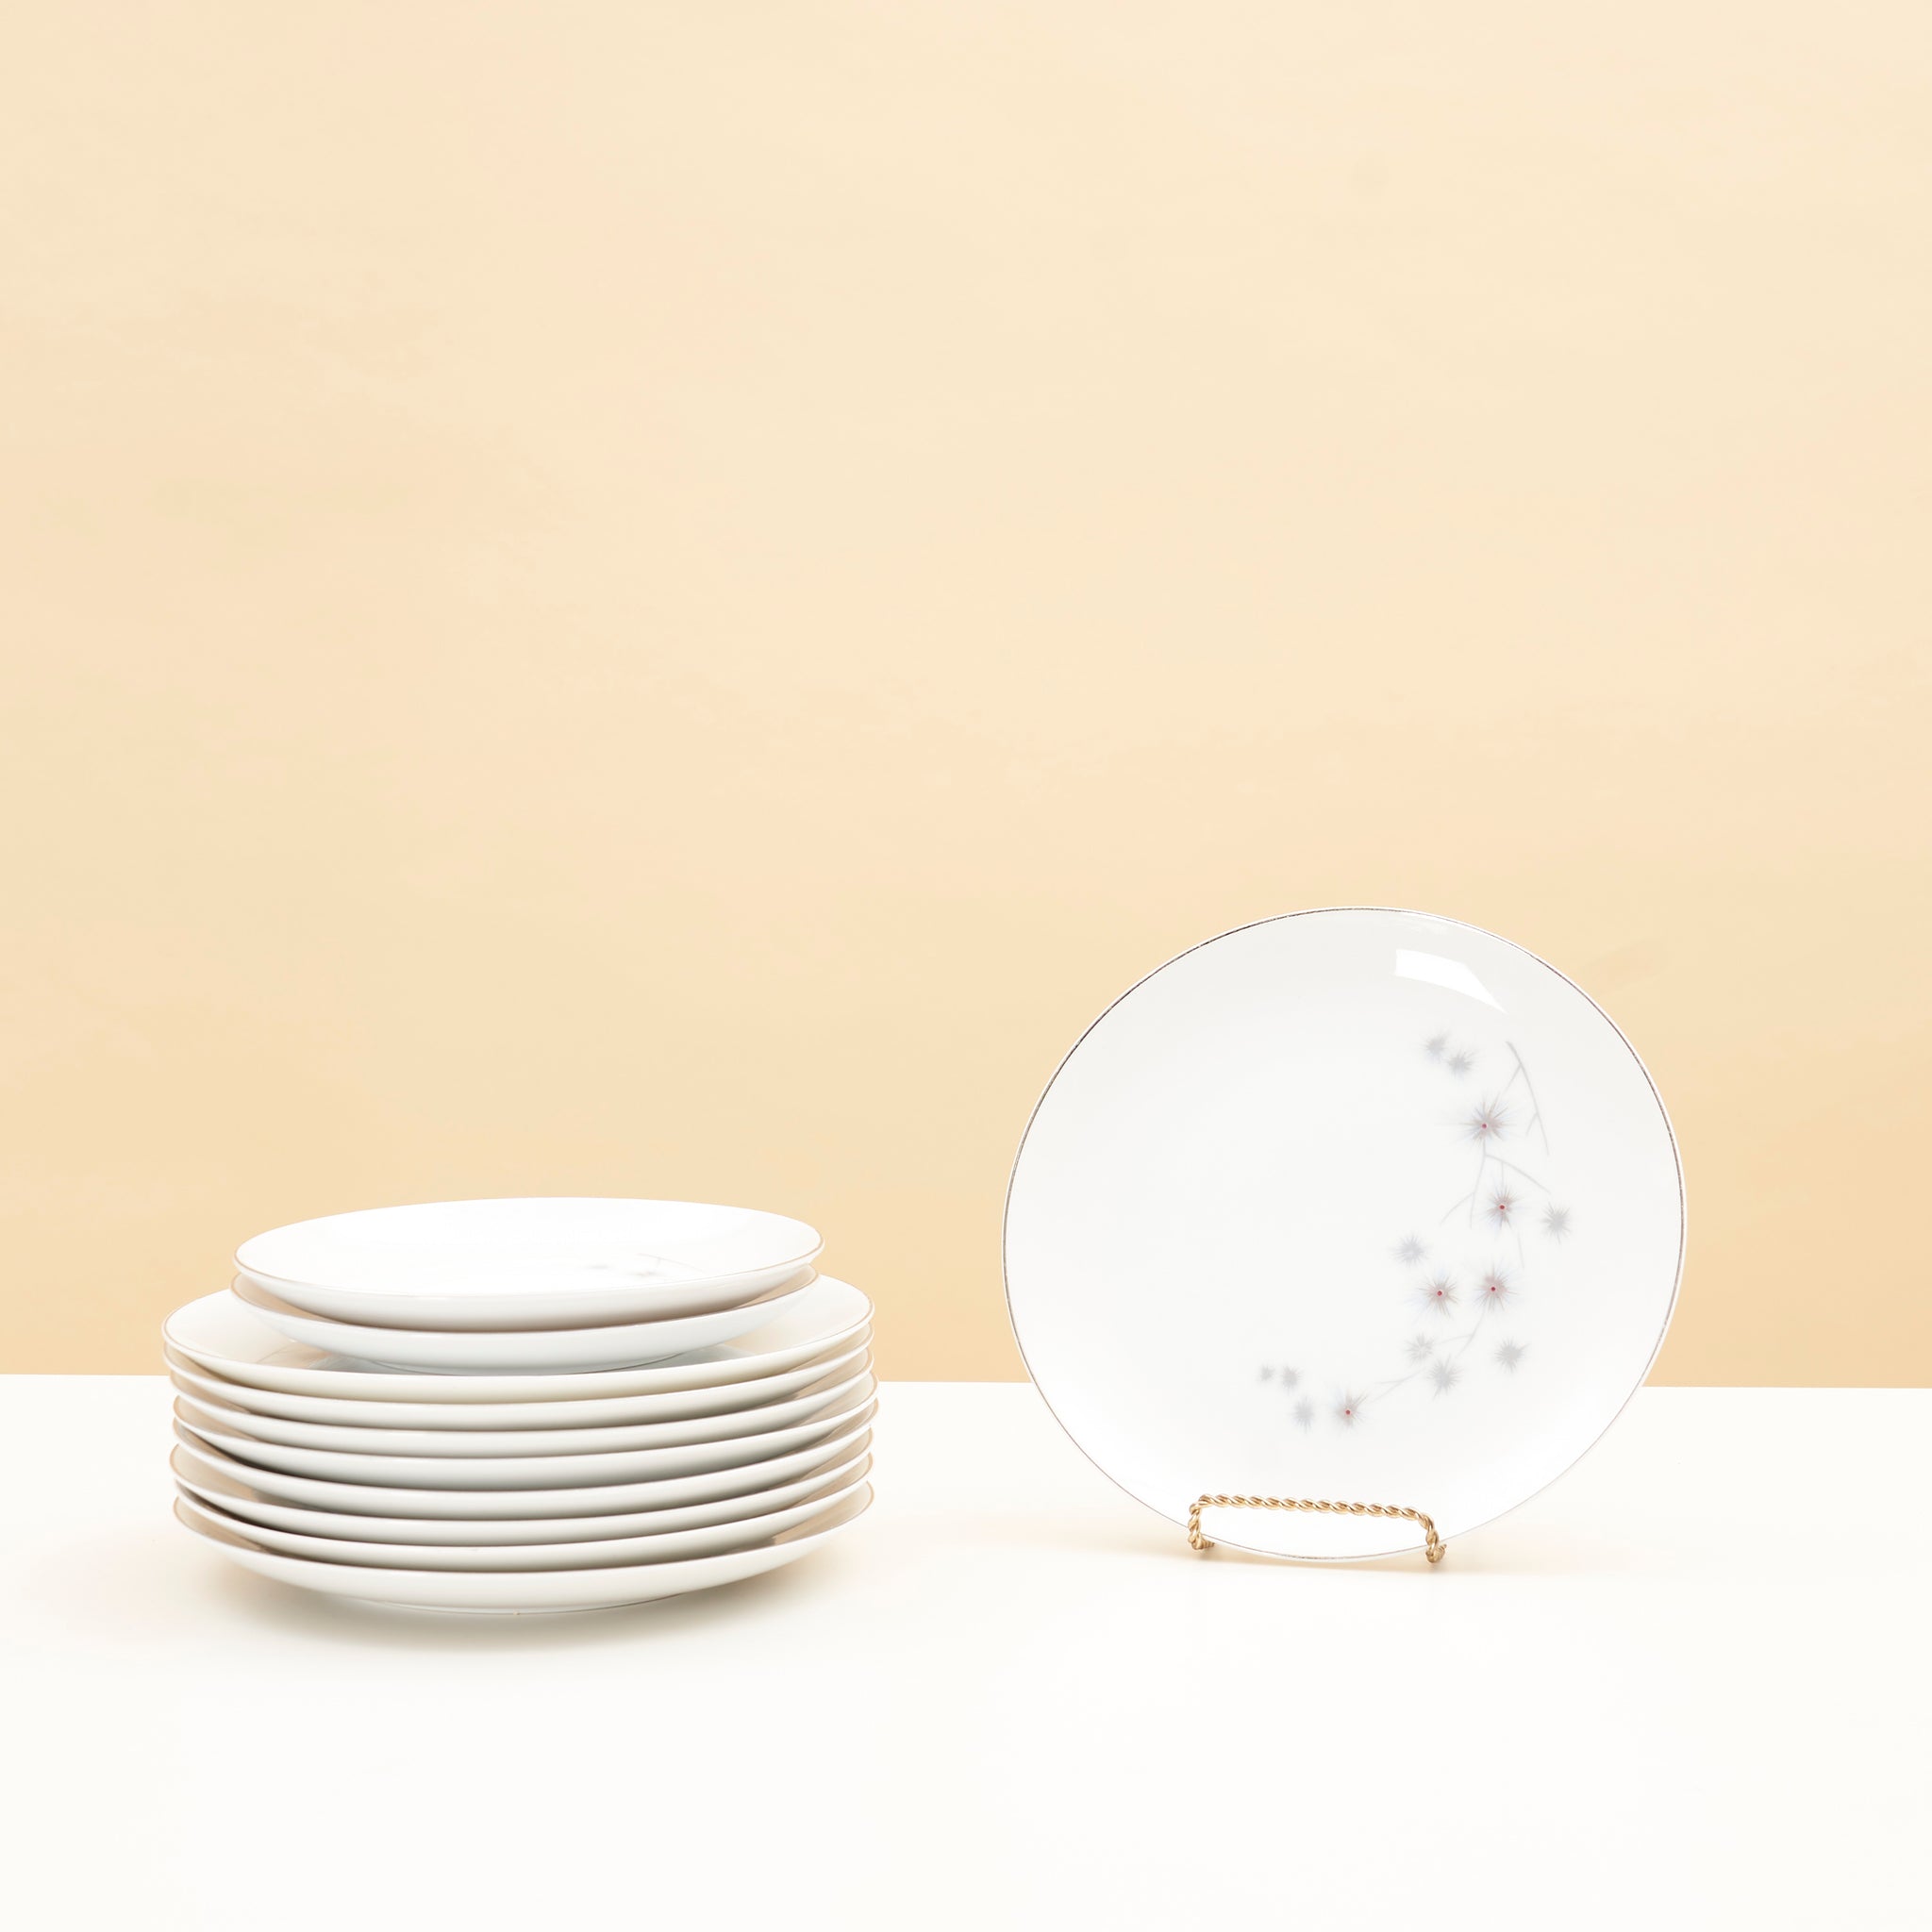 Luncheon Plates by Creative Fine China